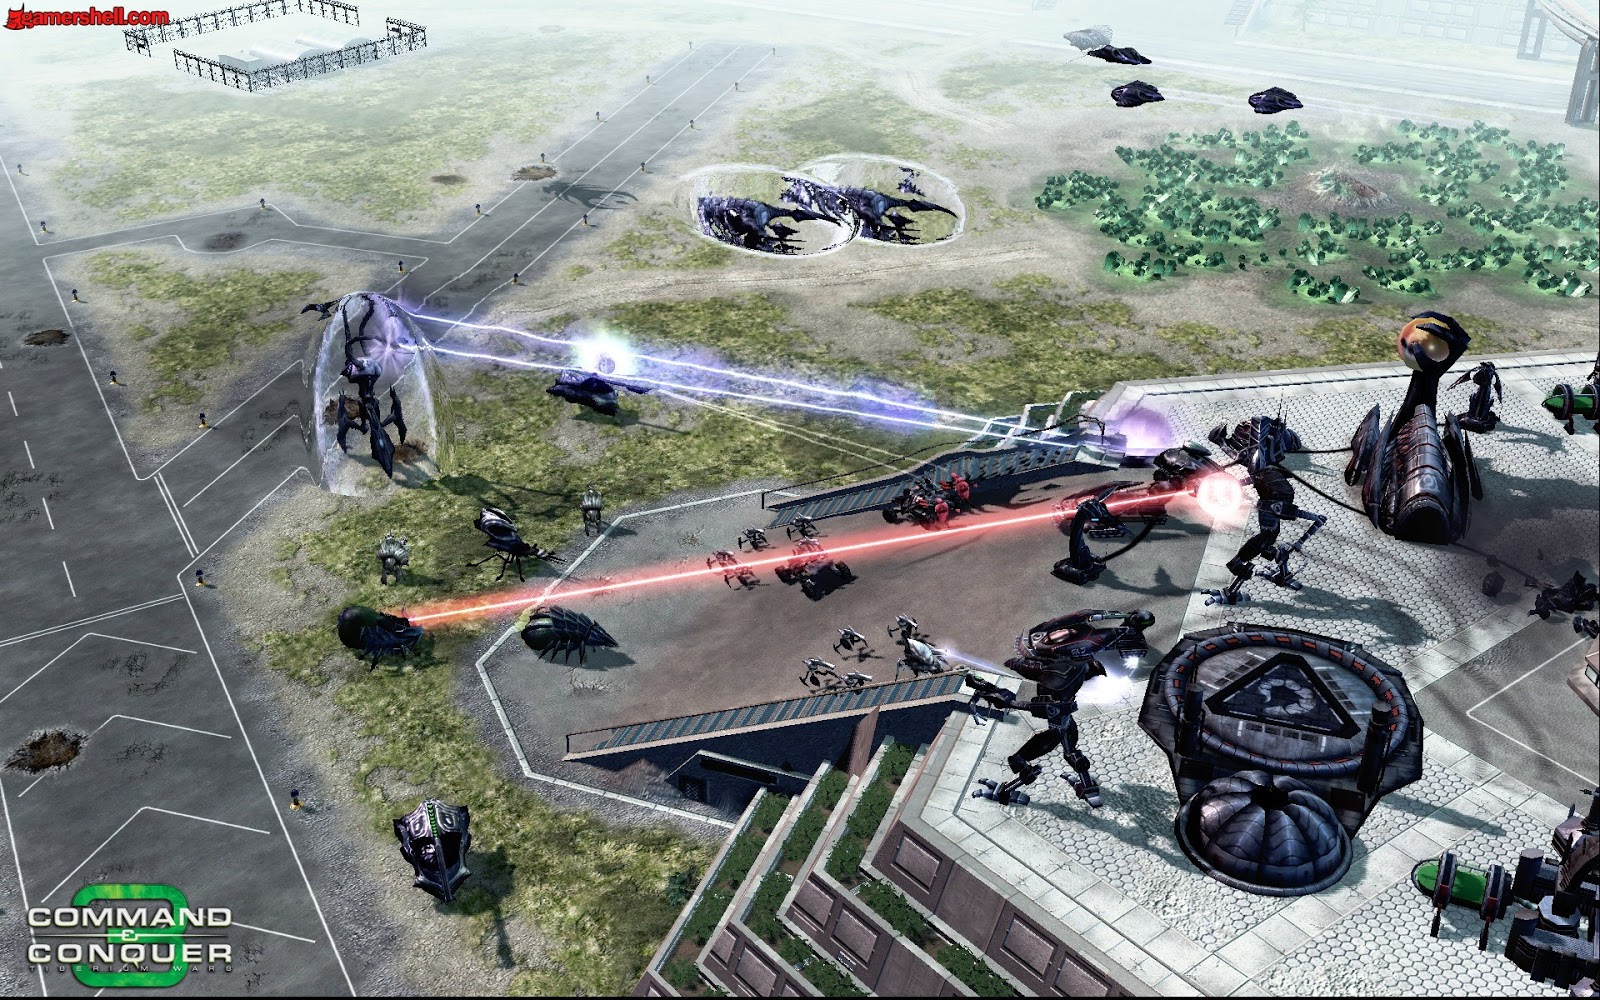 Command conquer 3 tiberium wars free download full game pc